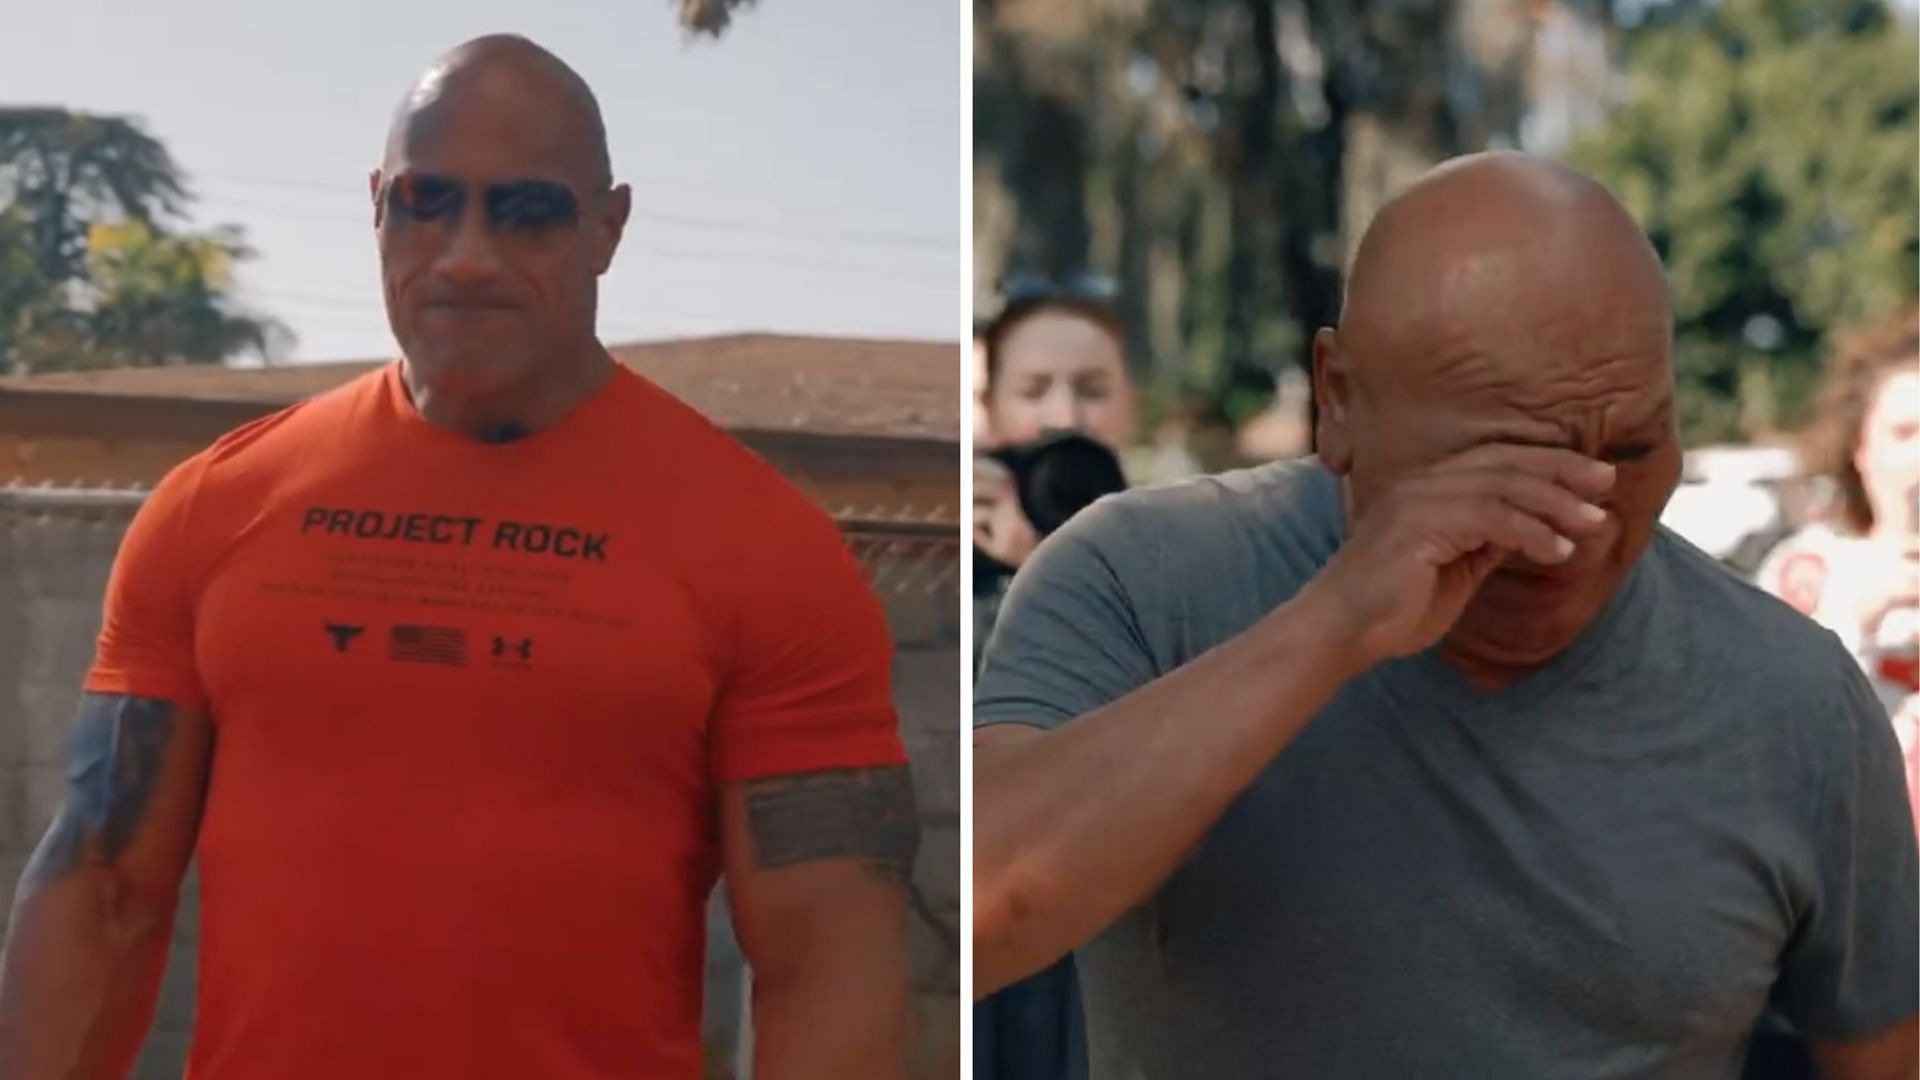 The Rock is a 17-time WWE champion [Image credits: Dwayne Johnson